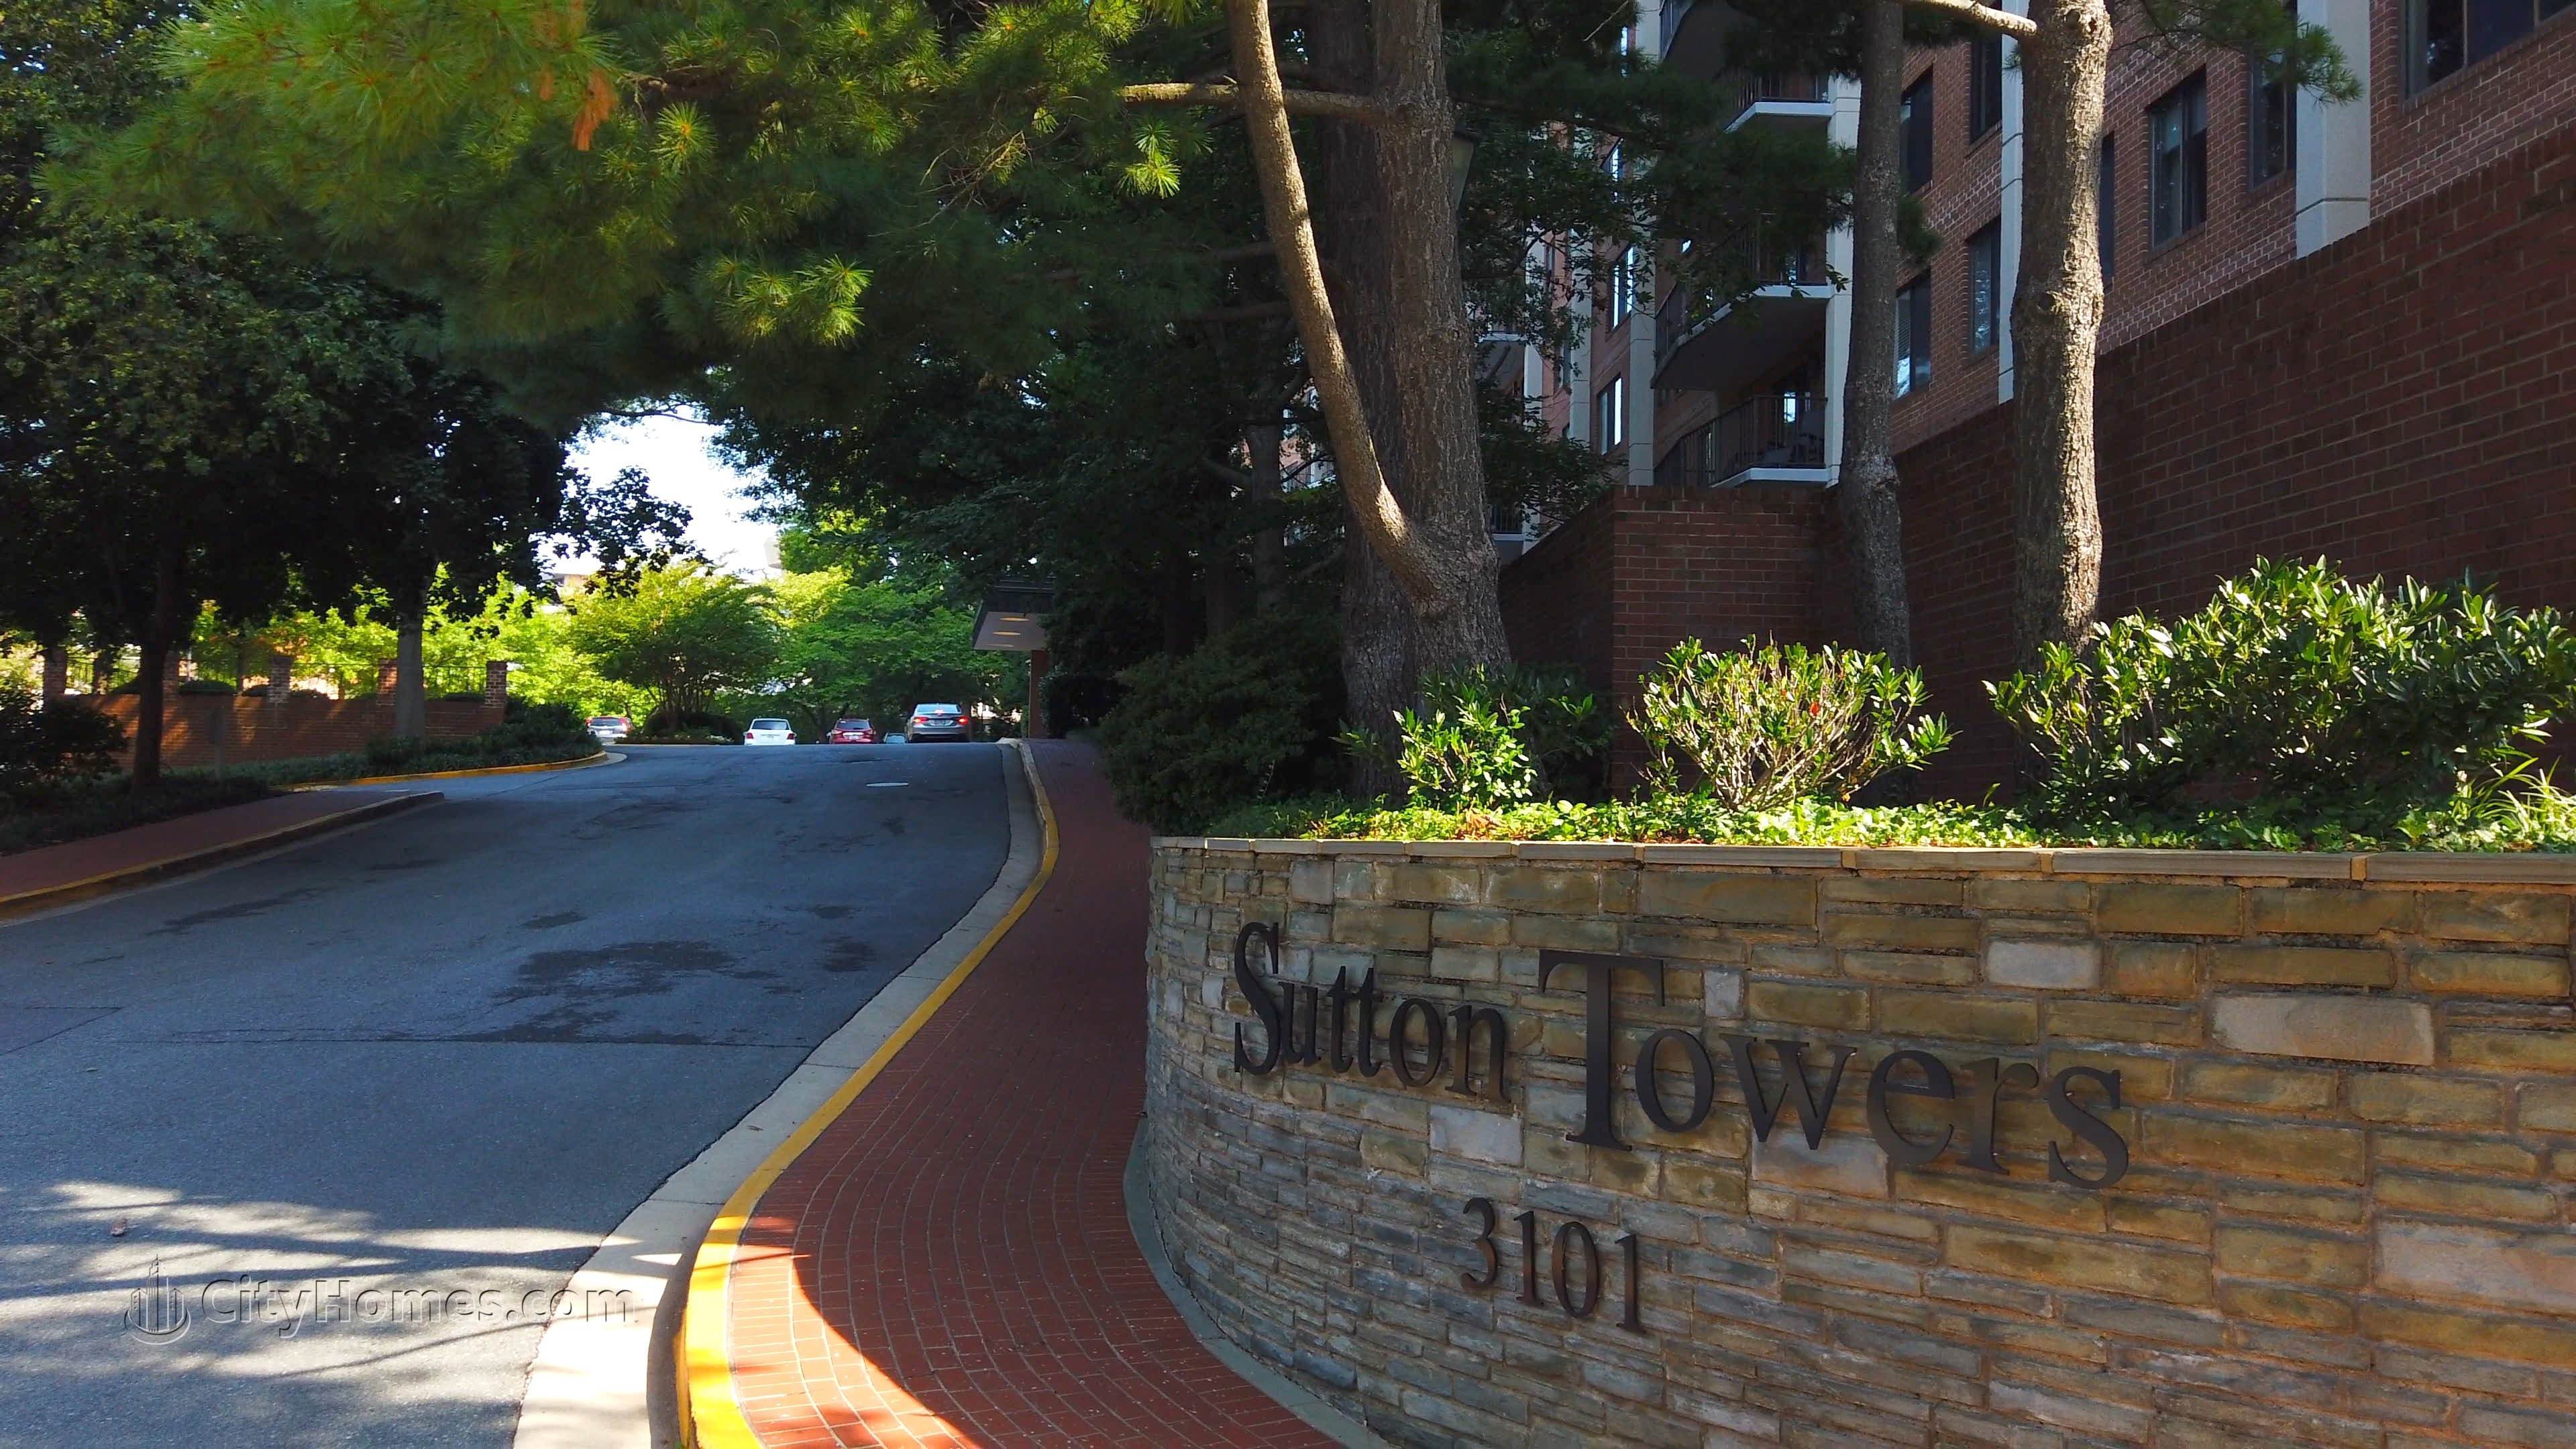 Sutton Towers byggnad vid 3101 New Mexico Ave NW, Wesley Heights, Washington, DC 20016